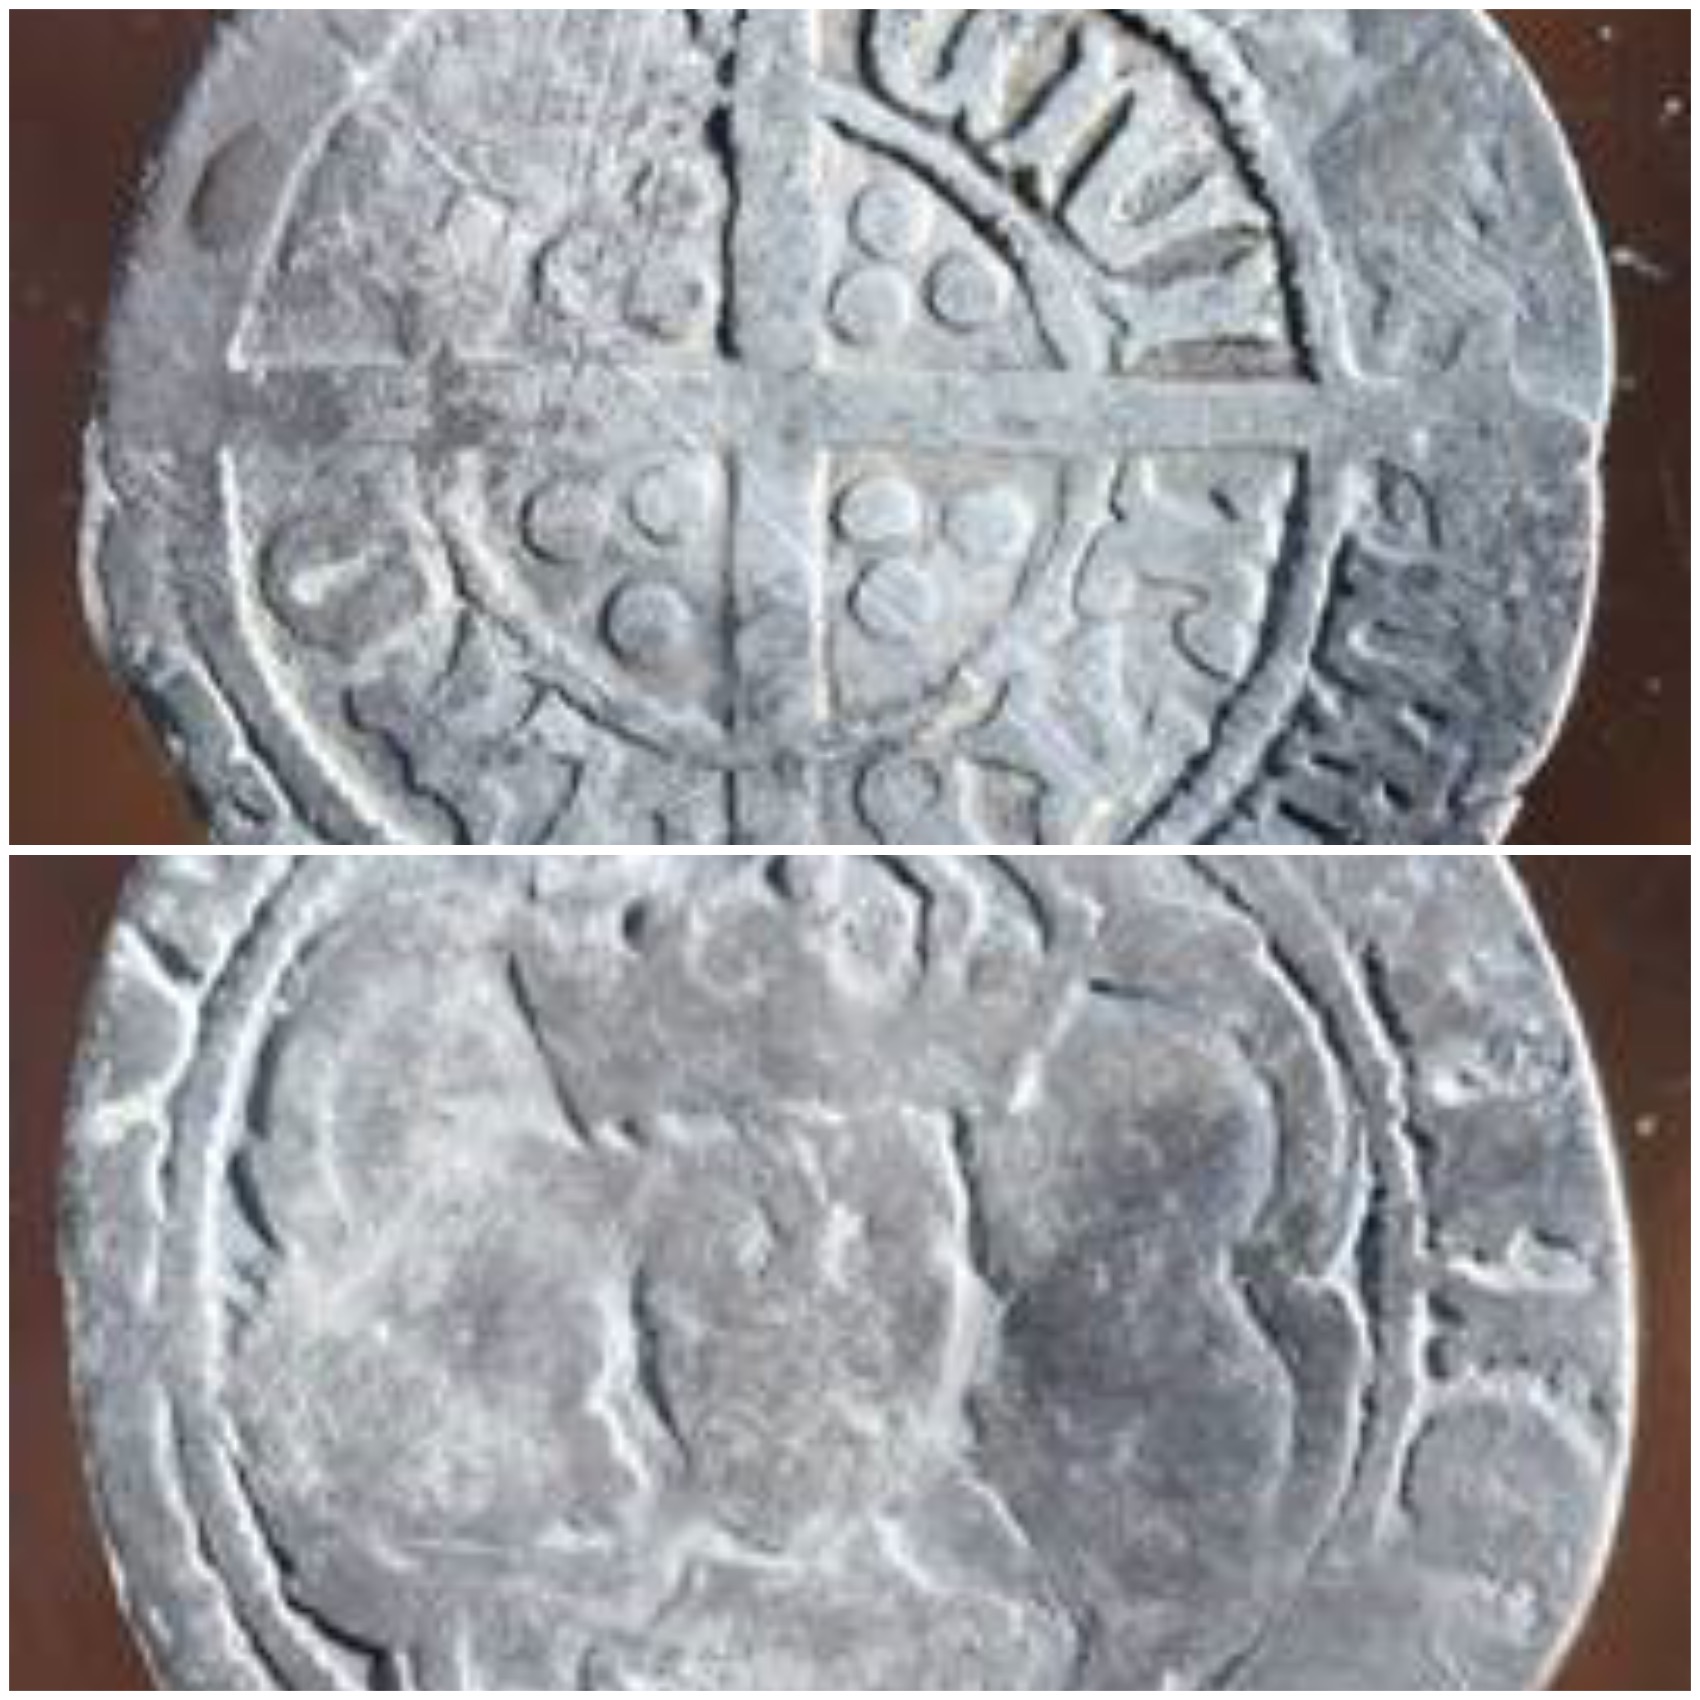 You are currently viewing Rare English Coin Discovered at Cupids Cove